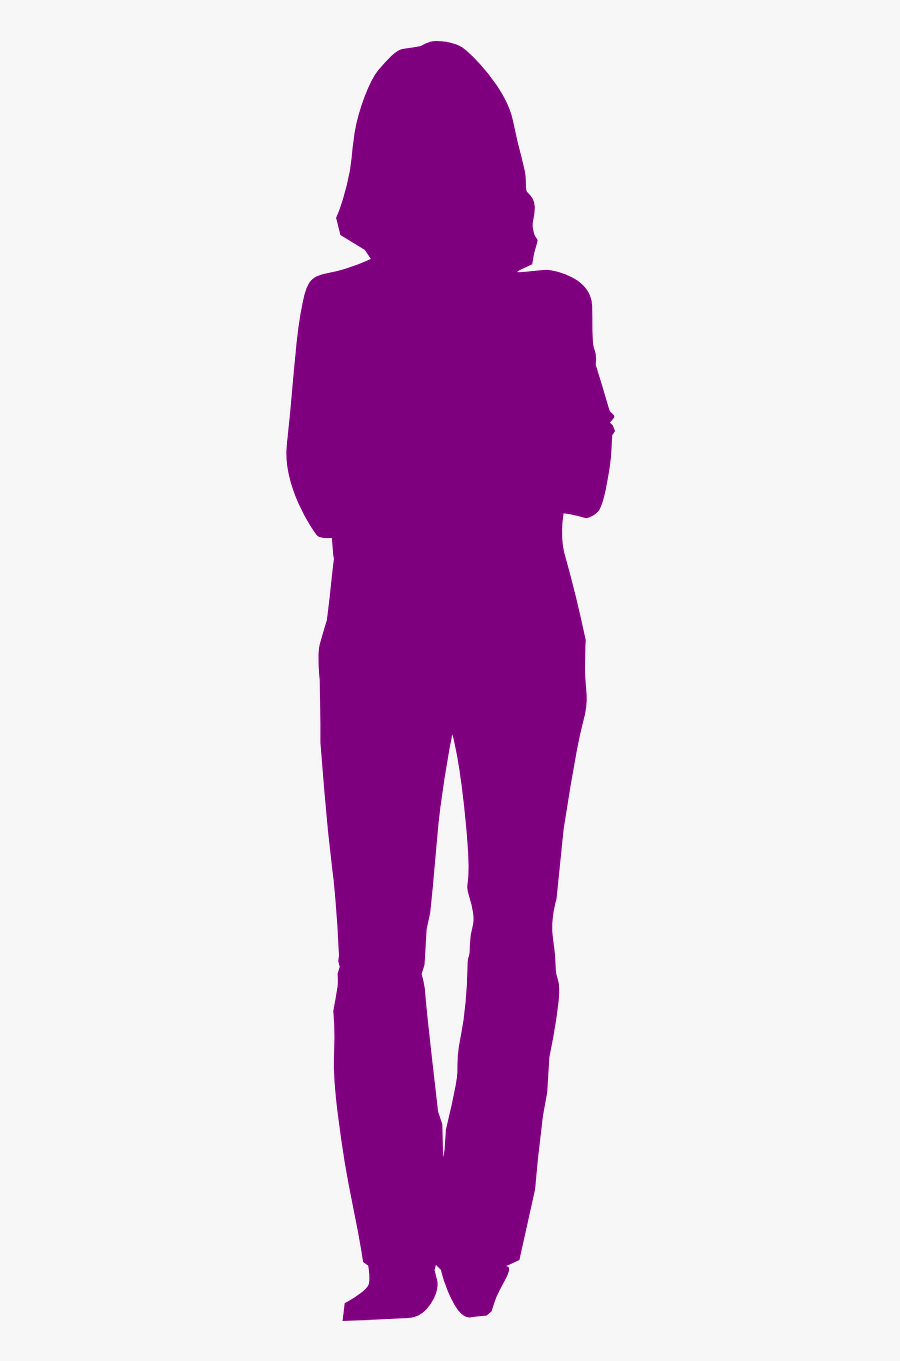 Woman Standing Silhouette Free Photo - Png Silhouette Of Women, Transparent Clipart